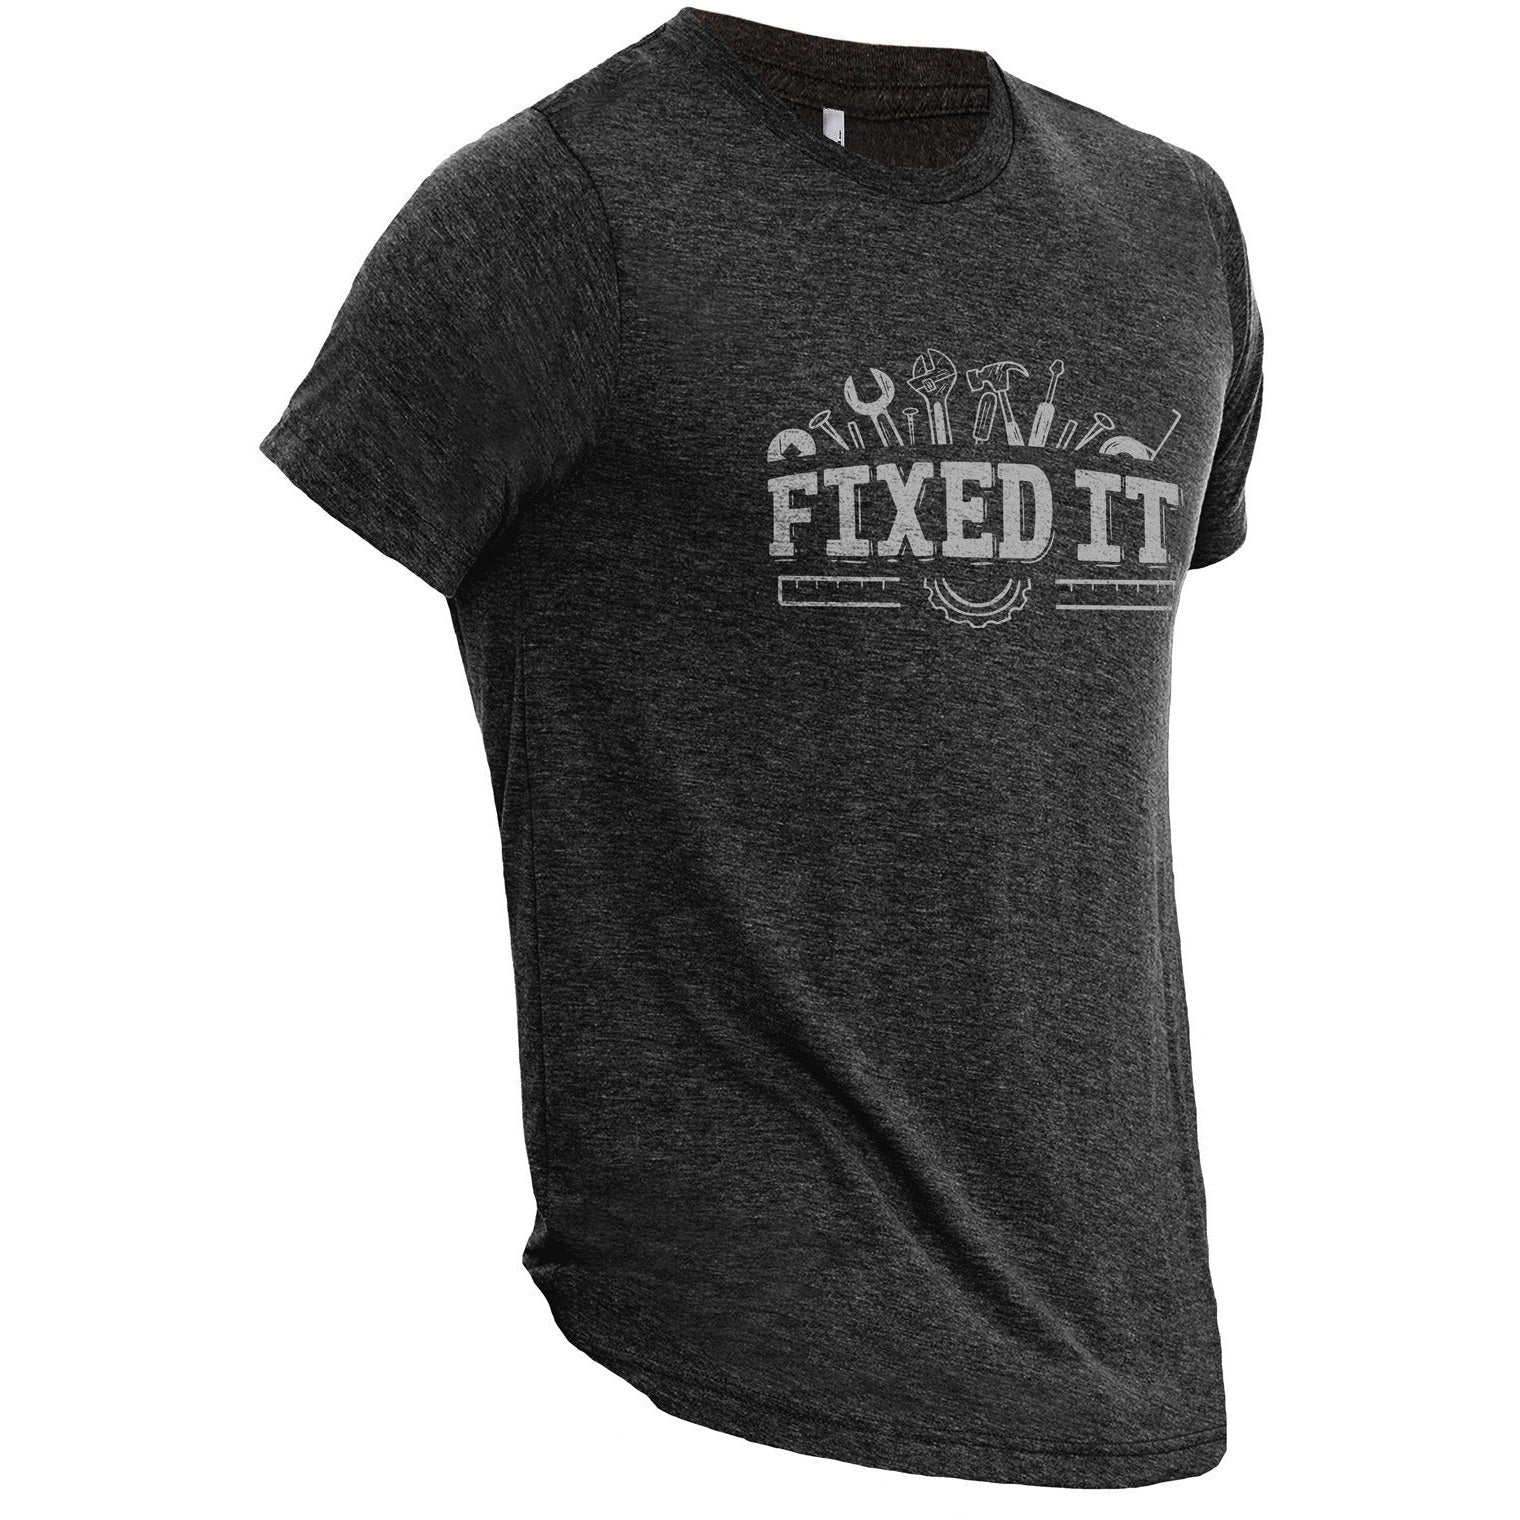 Fixed It Charcoal Printed Graphic Men's Crew T-Shirt Tee Side View